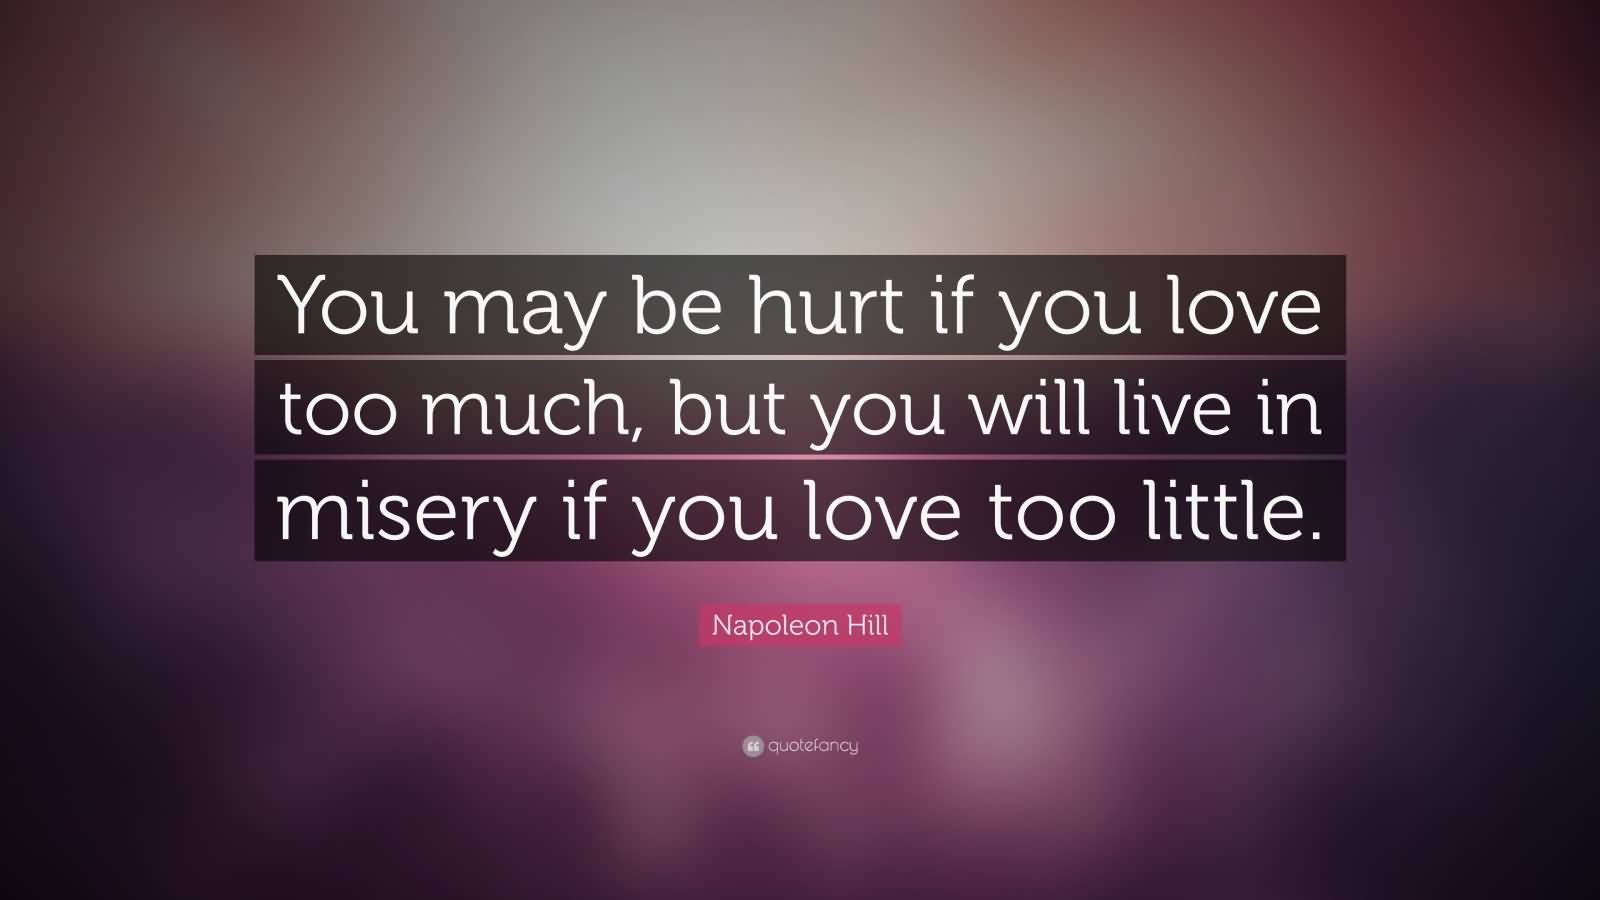 You may be hurt if you love too much, but you will live in misery if you love too little. Napolean Hill